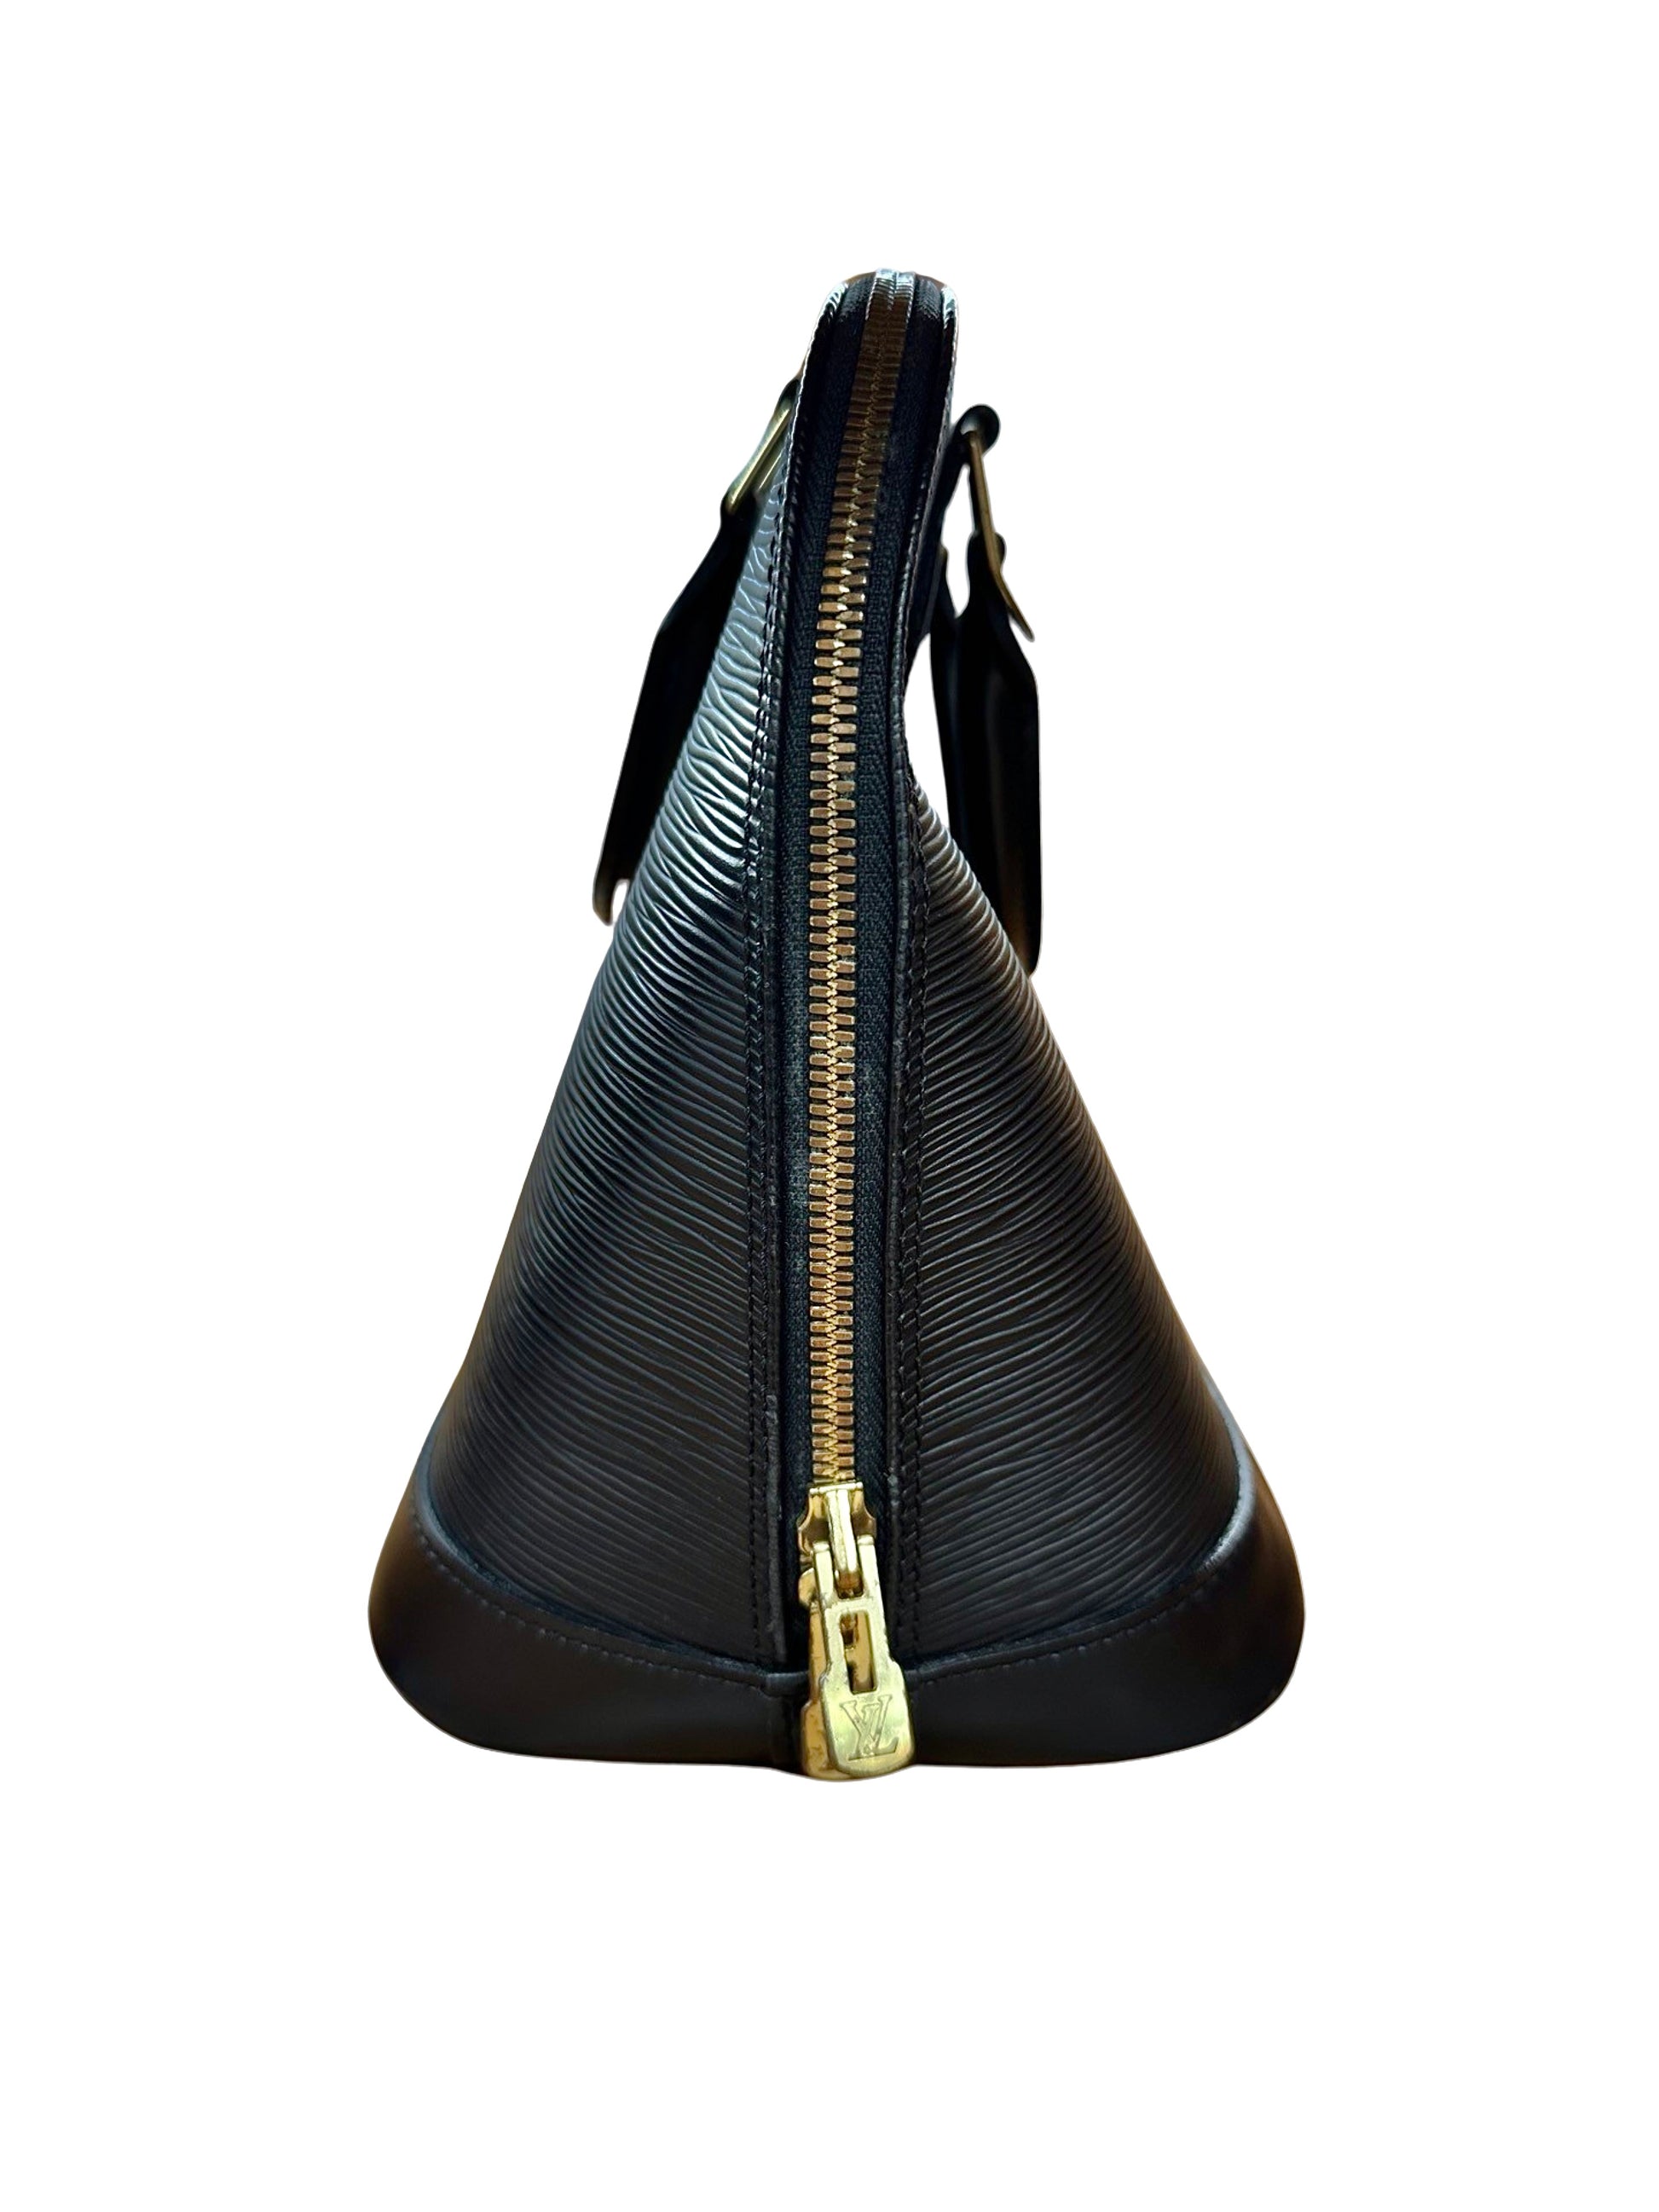 Side of black bag with gold zippers. The bag is out of shape on top